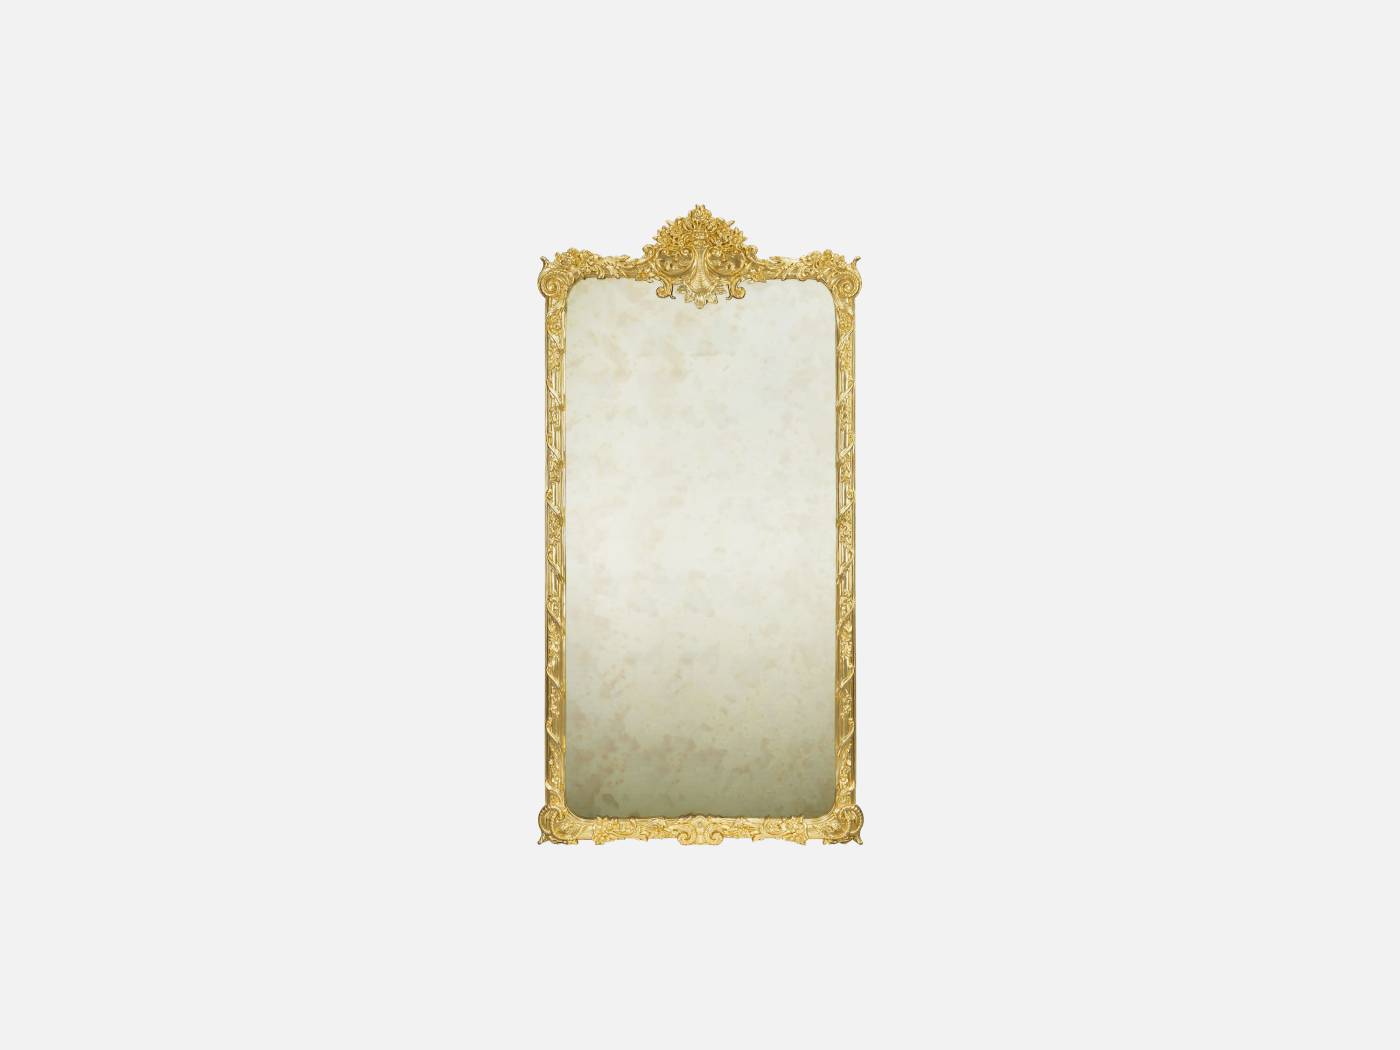 ART. 984-22 – The elegance of luxury classic Mirrorboards made in Italy by C.G. Capelletti.